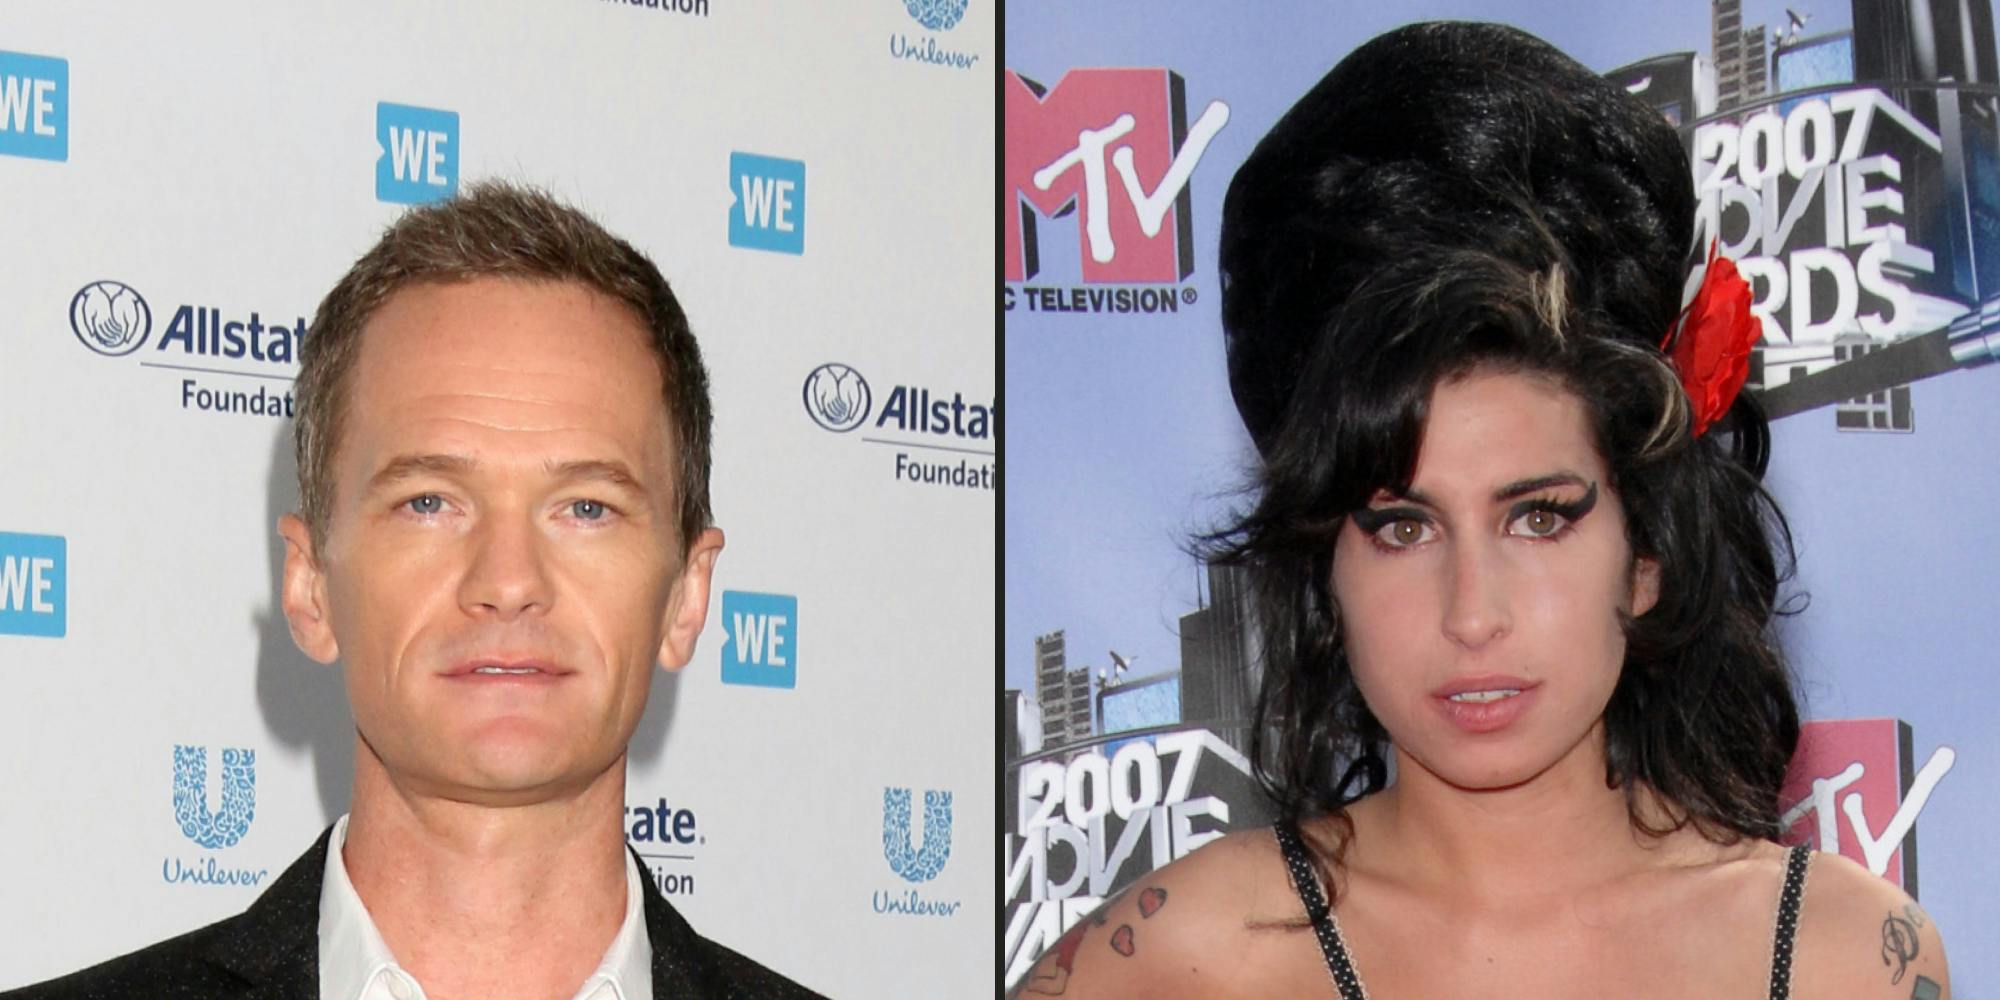 ‘I’m not understanding why the cake is this graphic’: Photo of Neil Patrick Harris’ awful Amy Winehouse ‘corpse’ cake resurfaces online